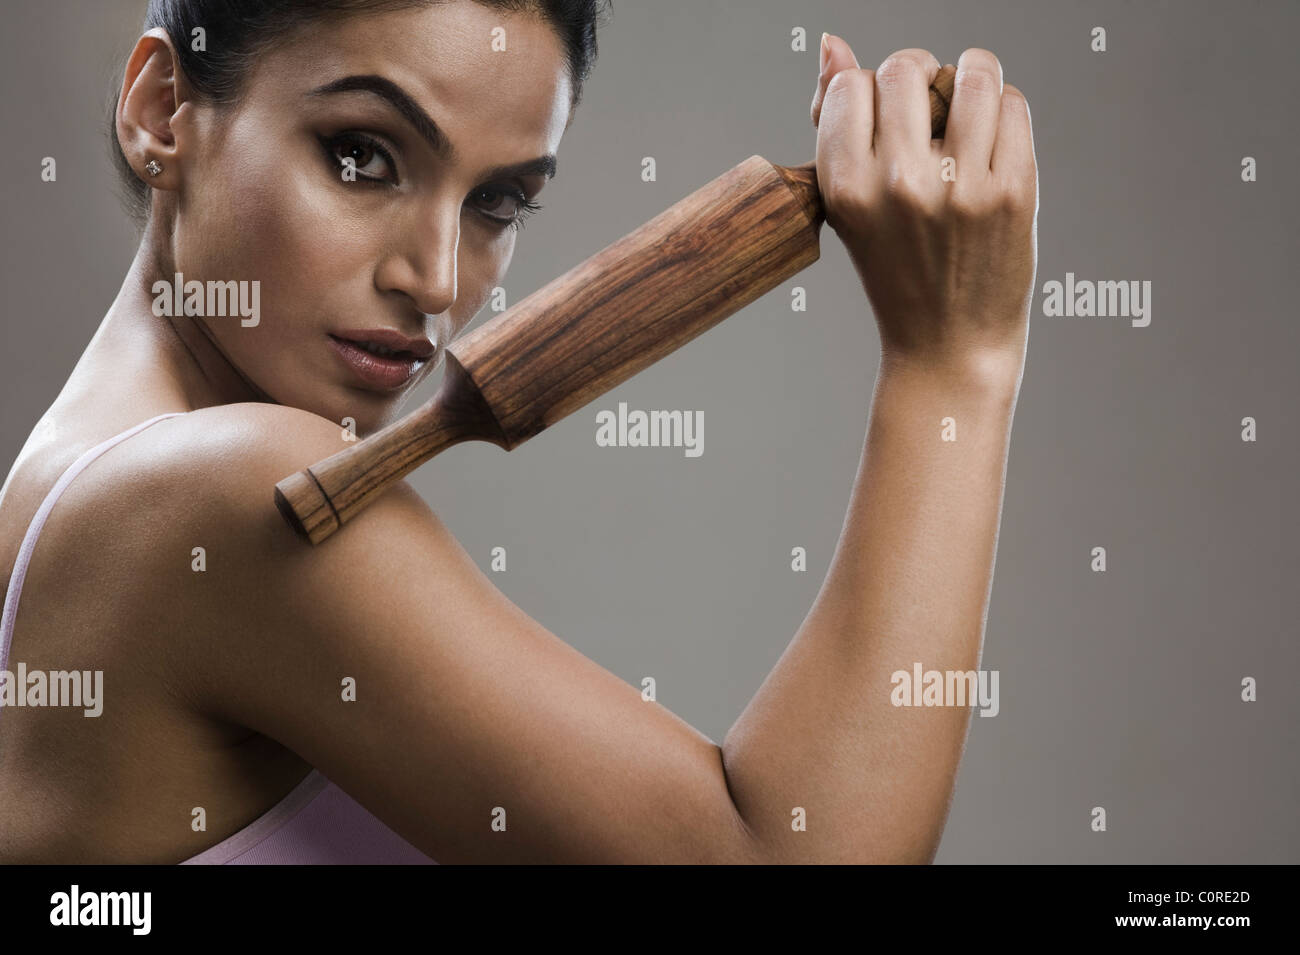 Portrait of a woman holding a rolling pin Stock Photo